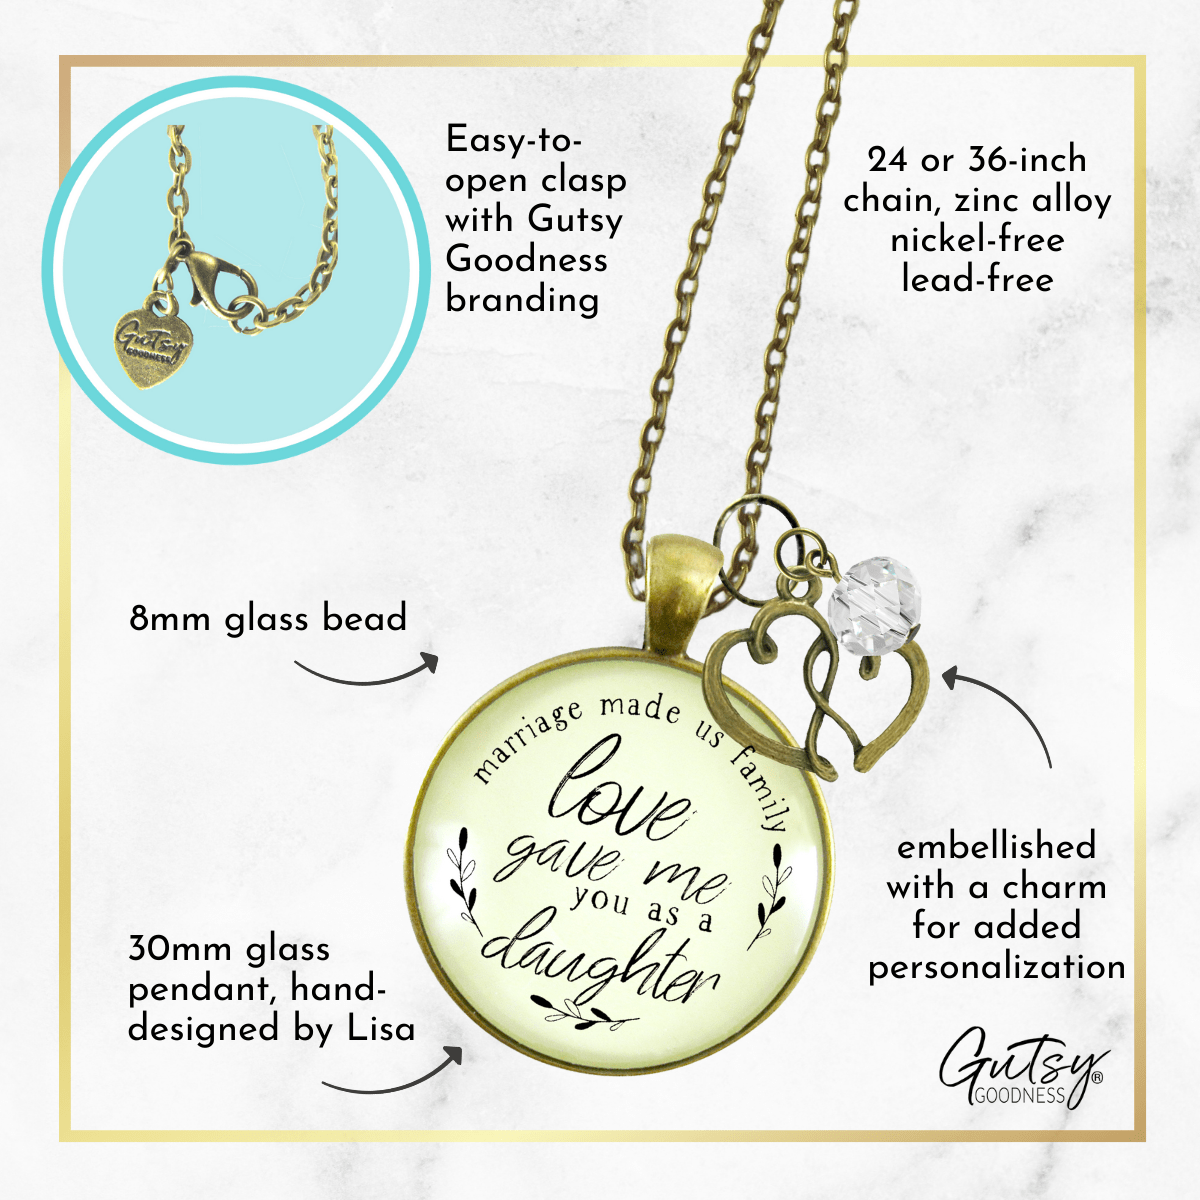 Gutsy Goodness Bonus Daughter in Law Necklace Marriage Made Family Wedding Jewelry - Gutsy Goodness Handmade Jewelry;Bonus Daughter In Law Necklace Marriage Made Family Wedding Jewelry - Gutsy Goodness Handmade Jewelry Gifts